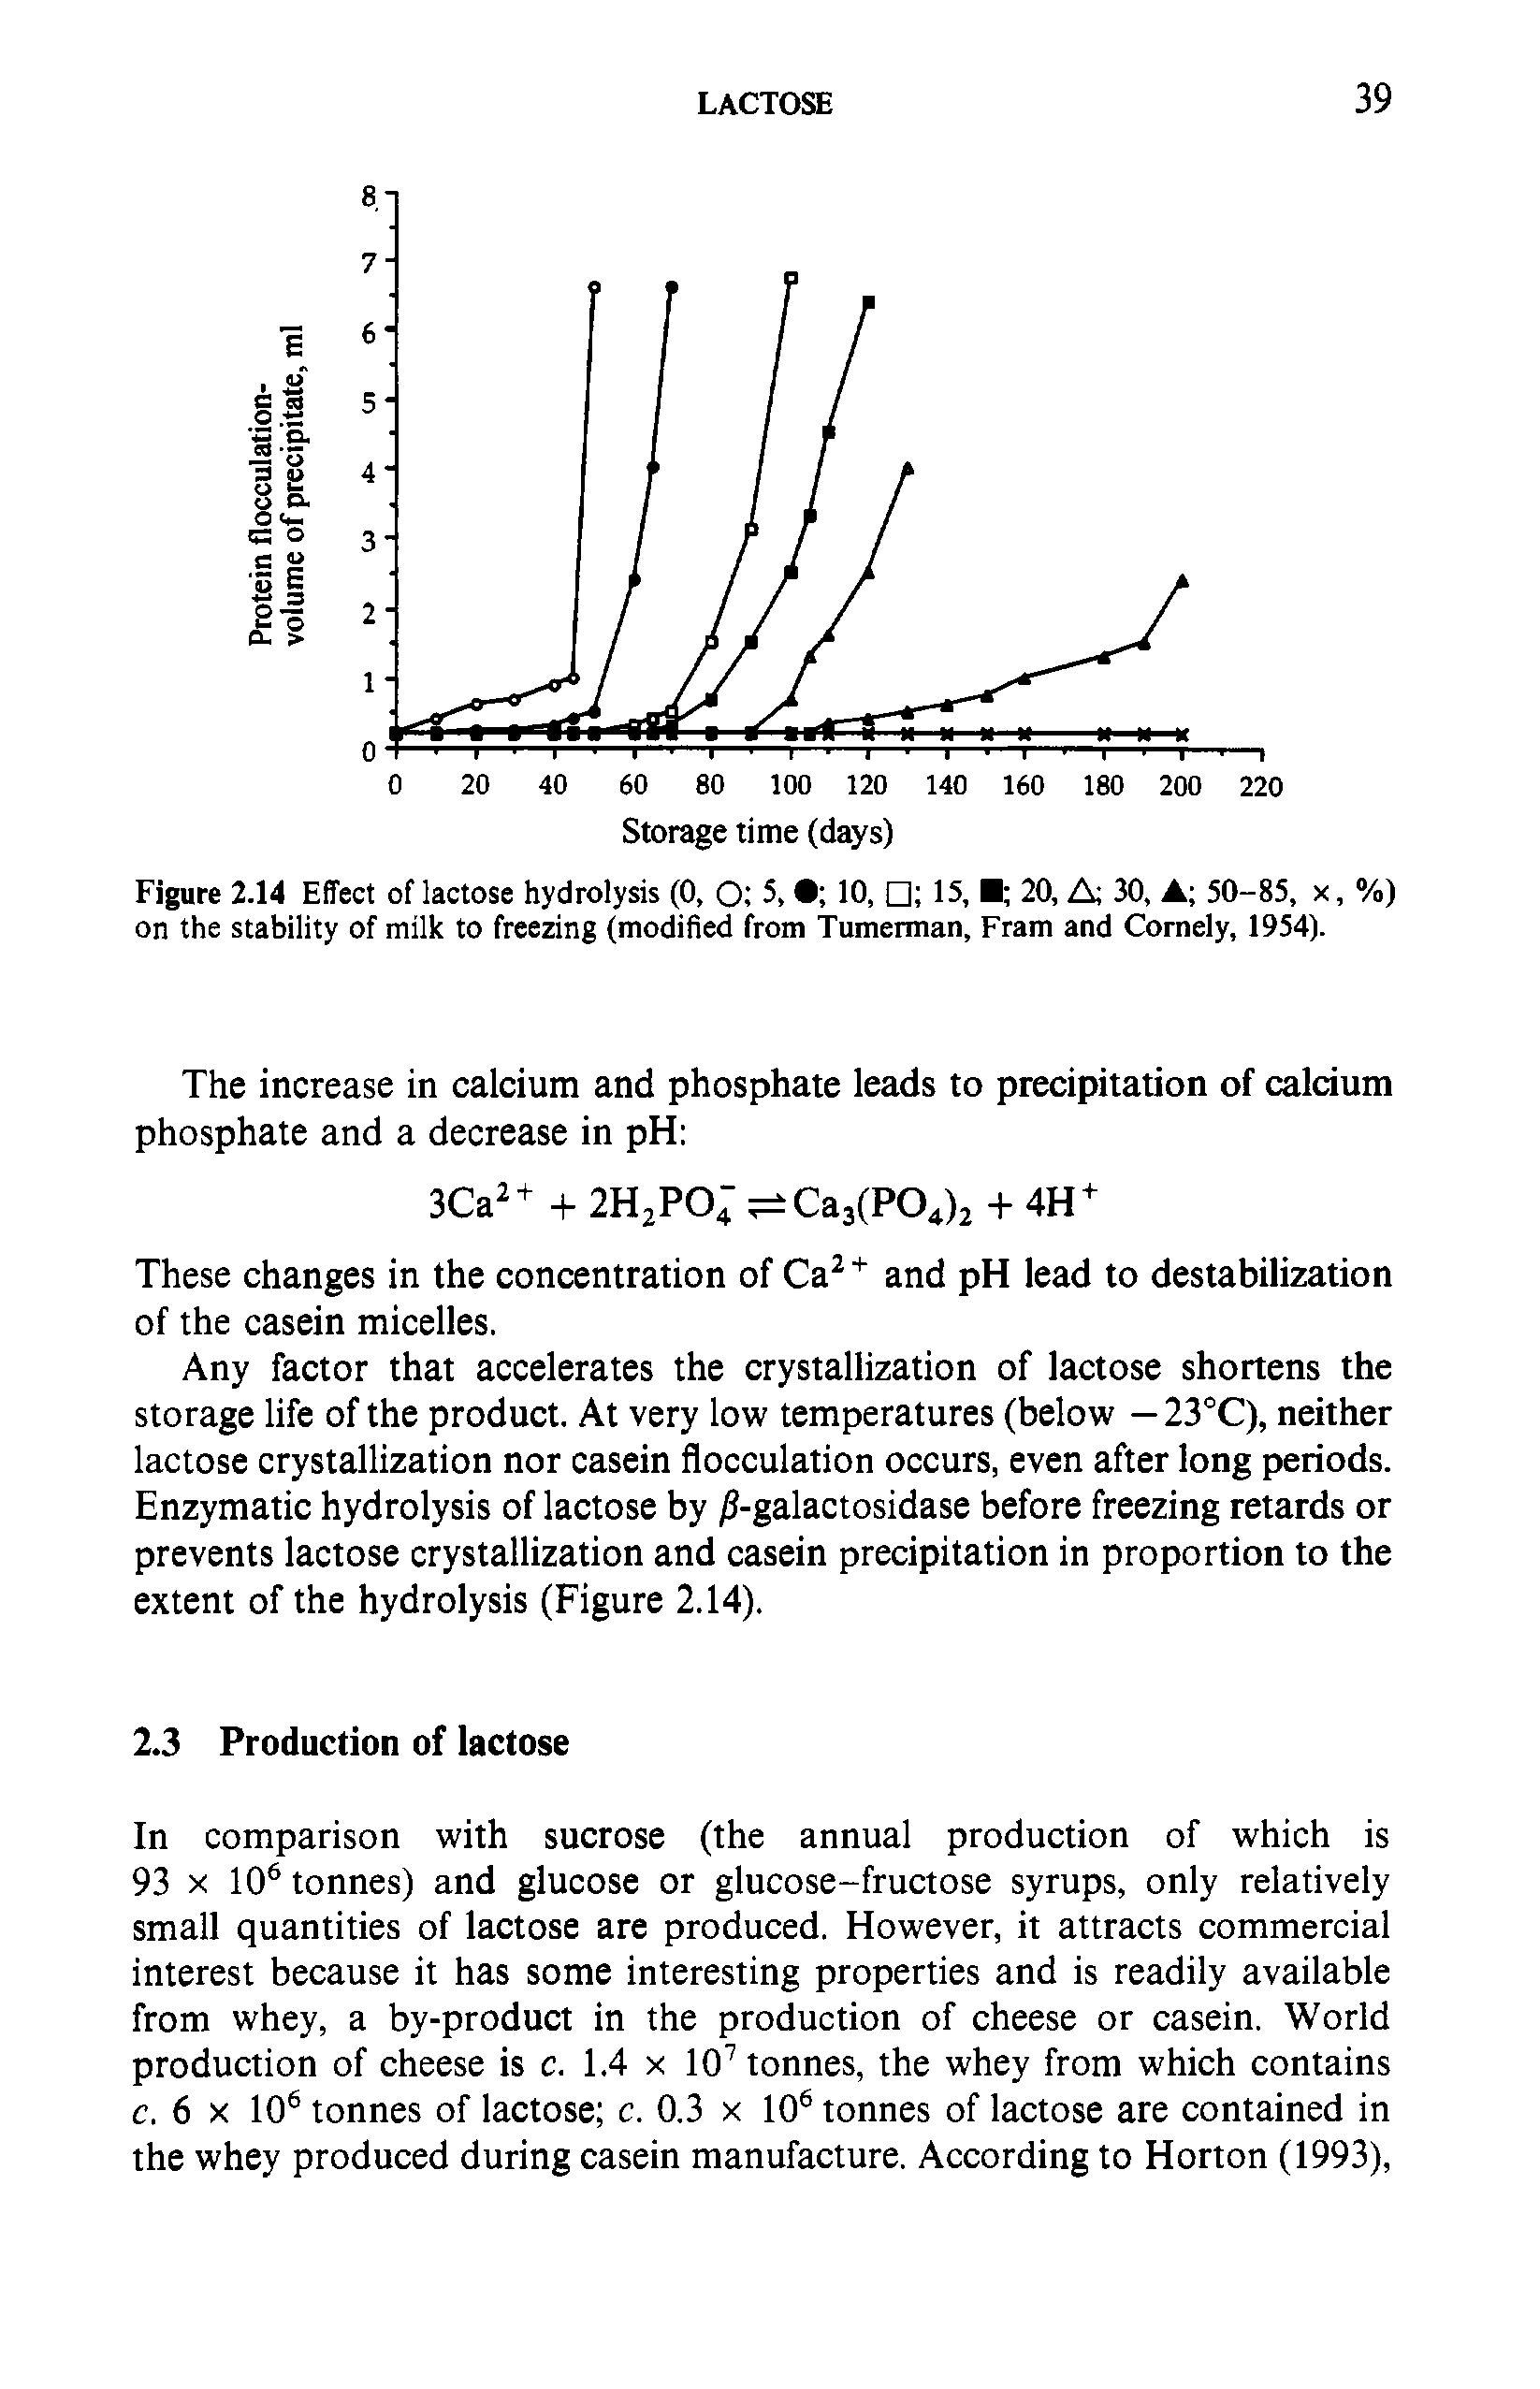 Figure 2.14 Effect of lactose hydrolysis (0, O 5, 10, 15, 20, A 30, A 50-85, x, %) on the stability of milk to freezing (modified from Tumerman, Fram and Comely, 1954).